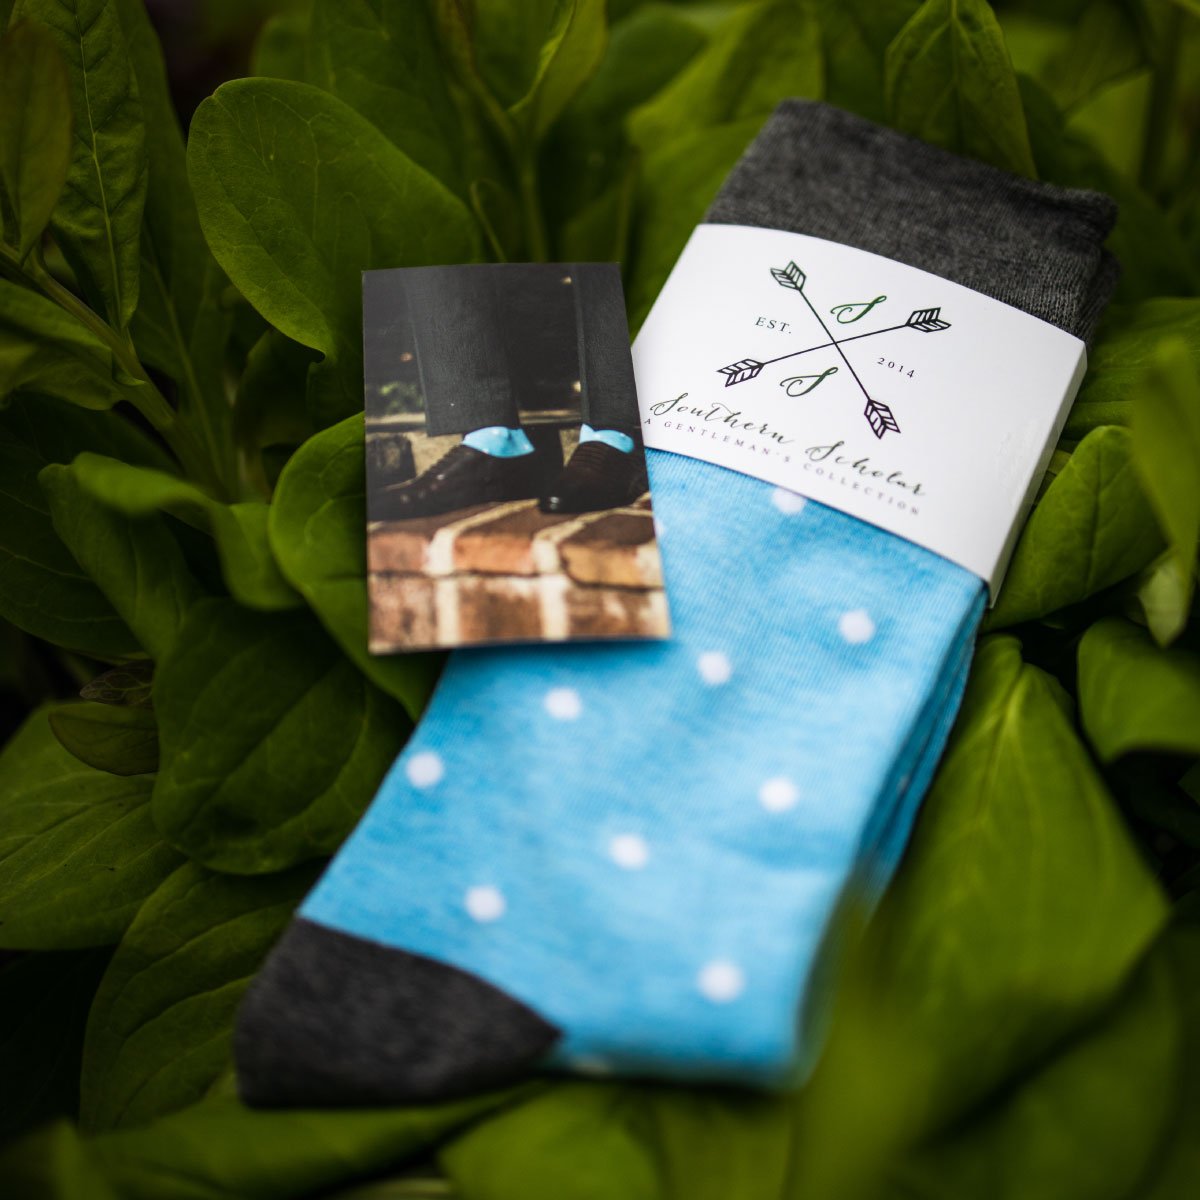 A pair of baby blue socks with white polka dots sitting on green leafs